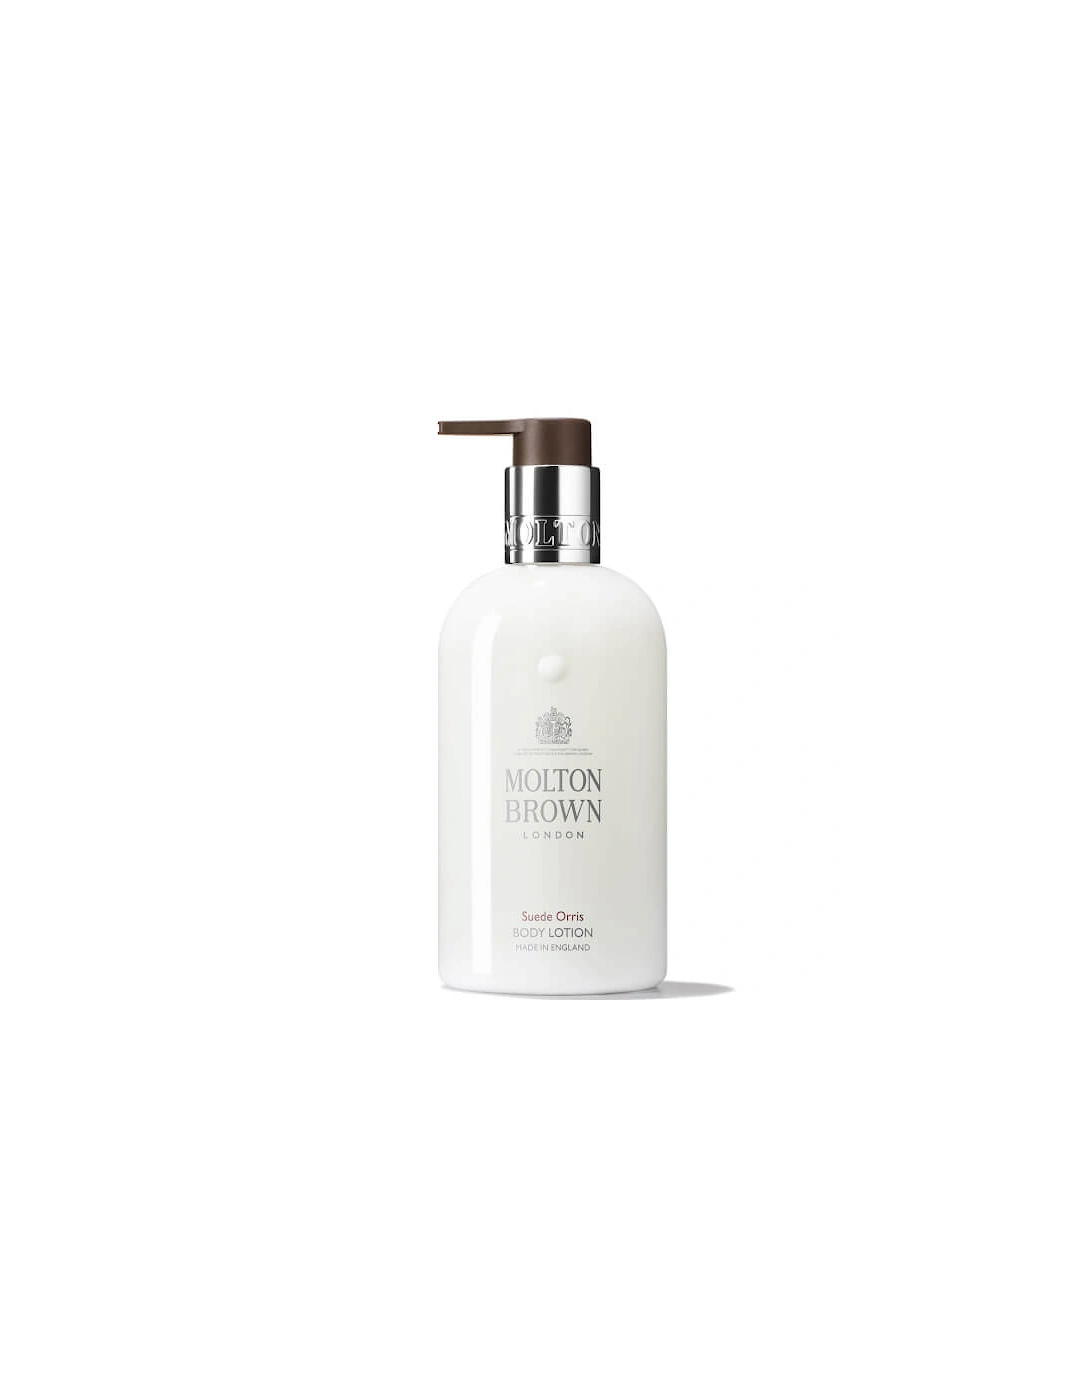 Suede Orris Body Lotion - Molton Brown, 2 of 1